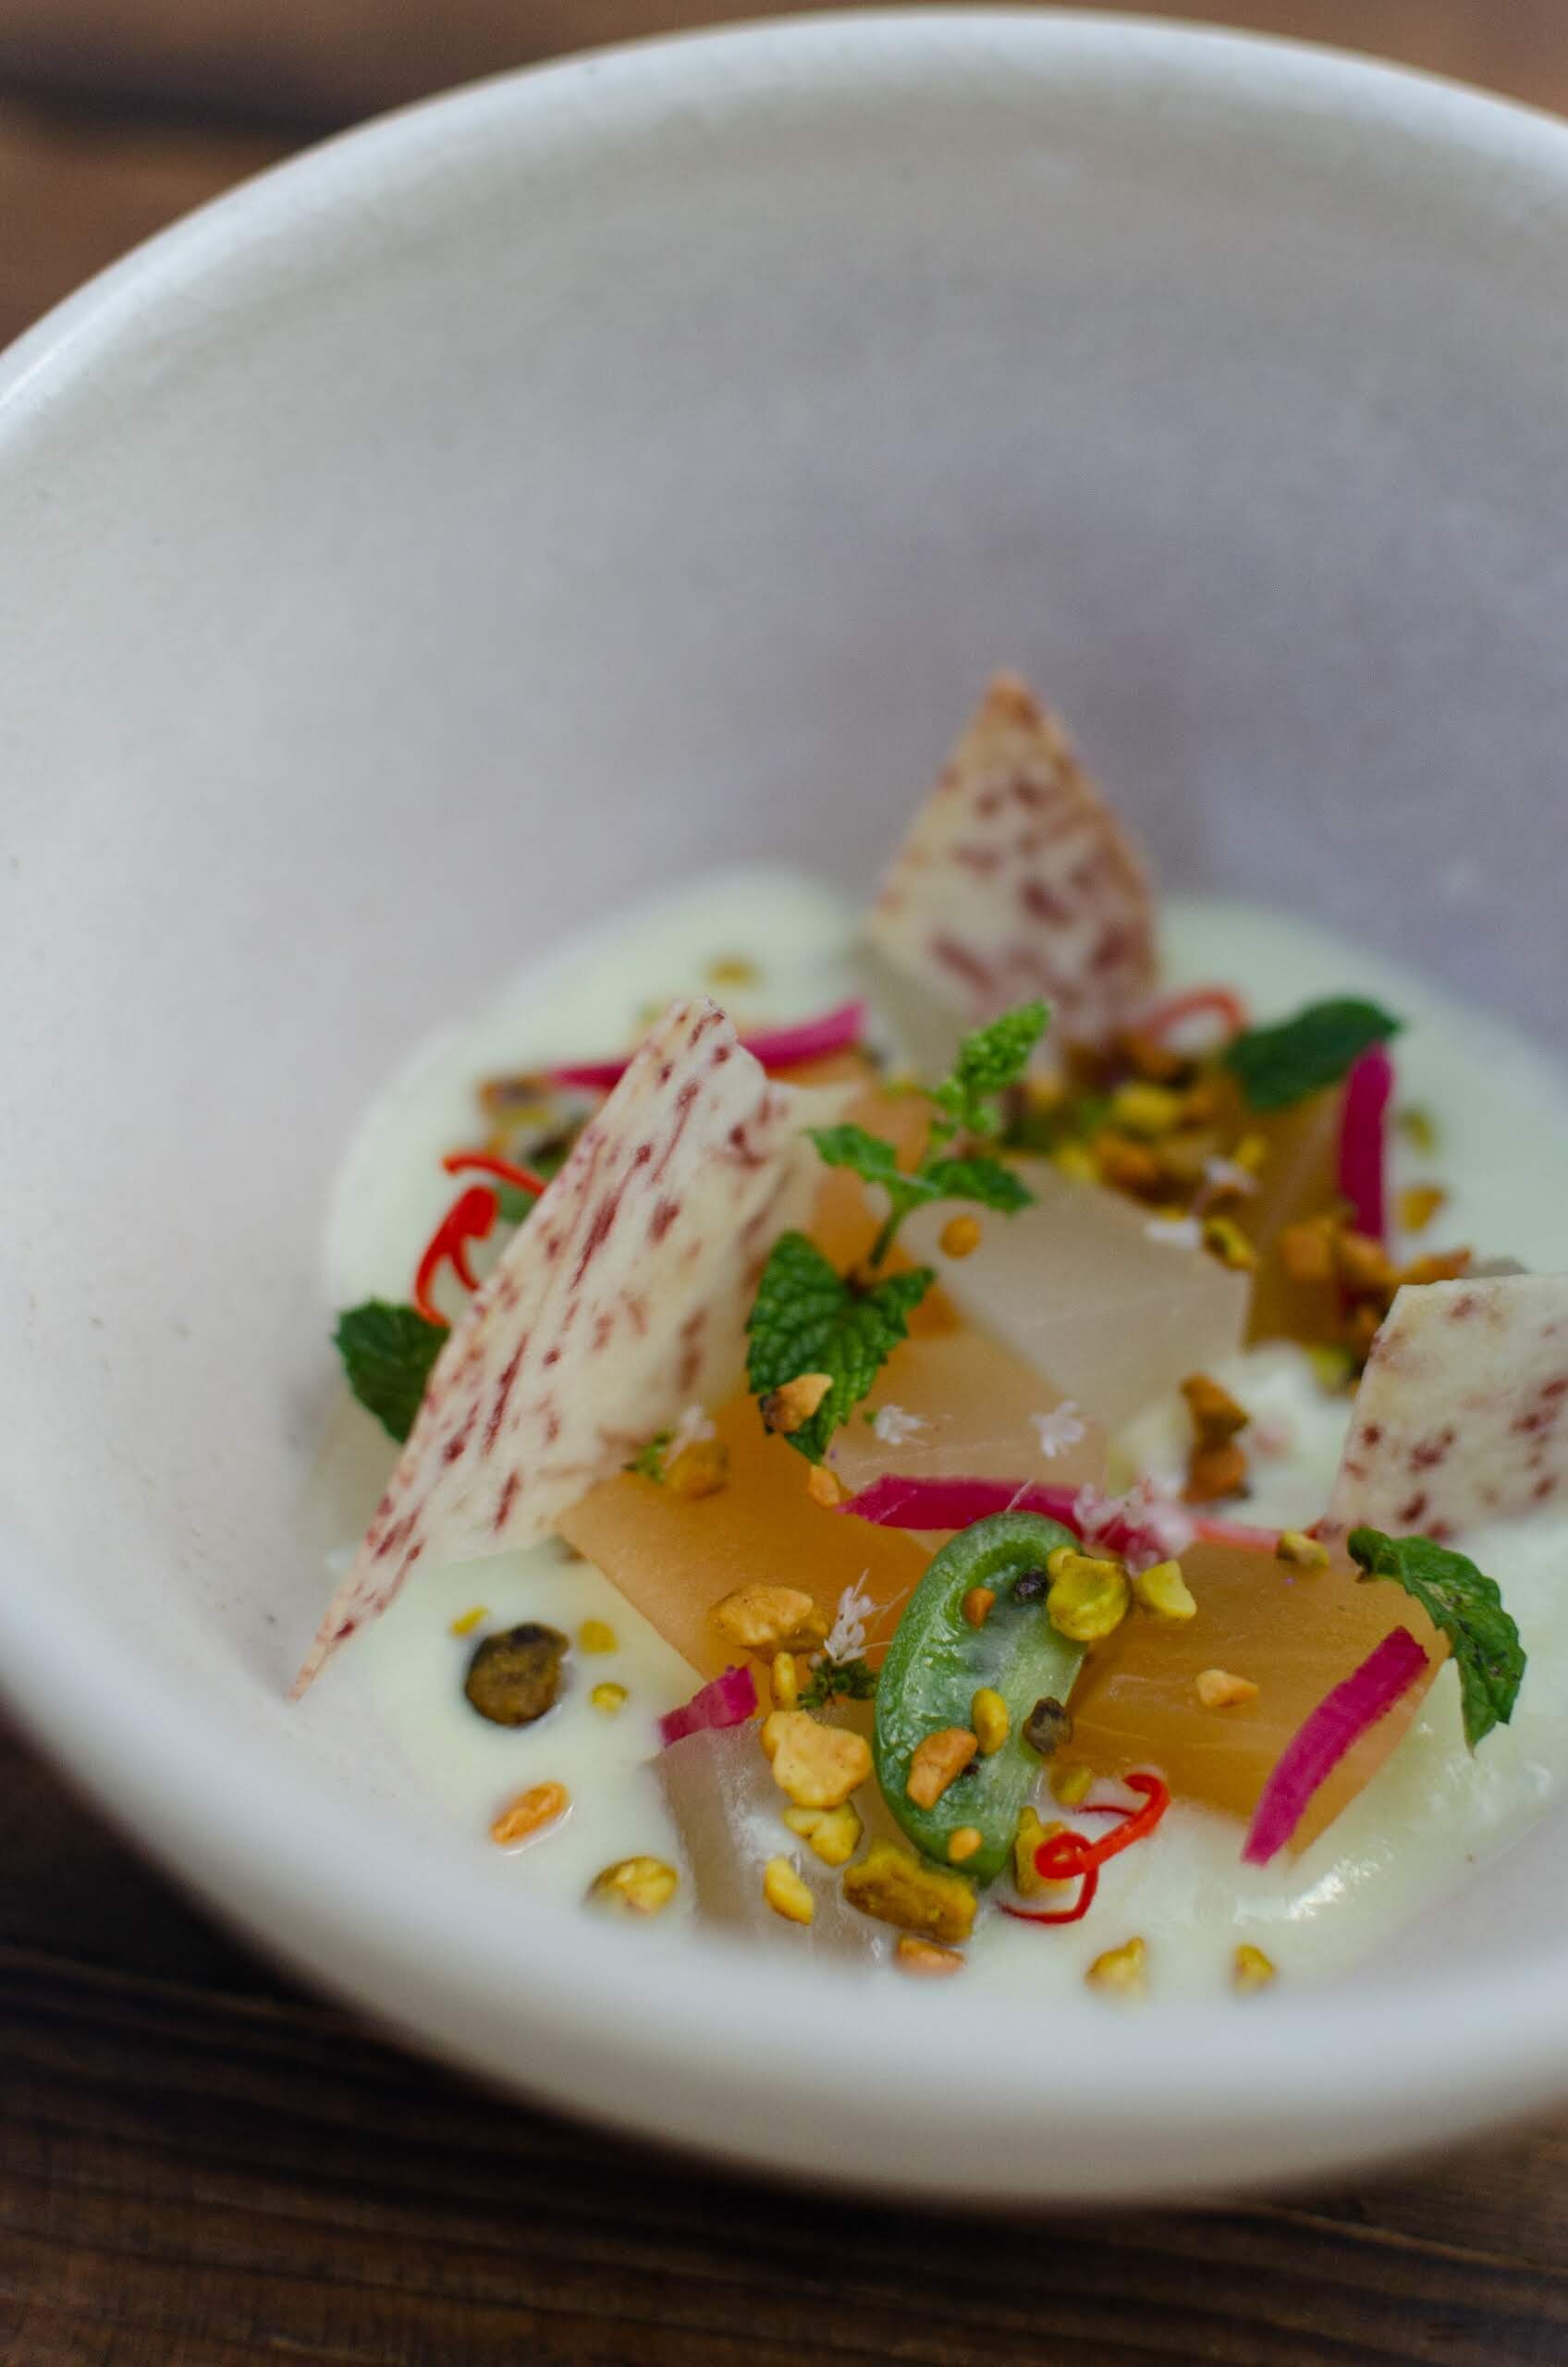  Chilled Heirloom Melon Soup, Kiwi Berries, Taro Chip 